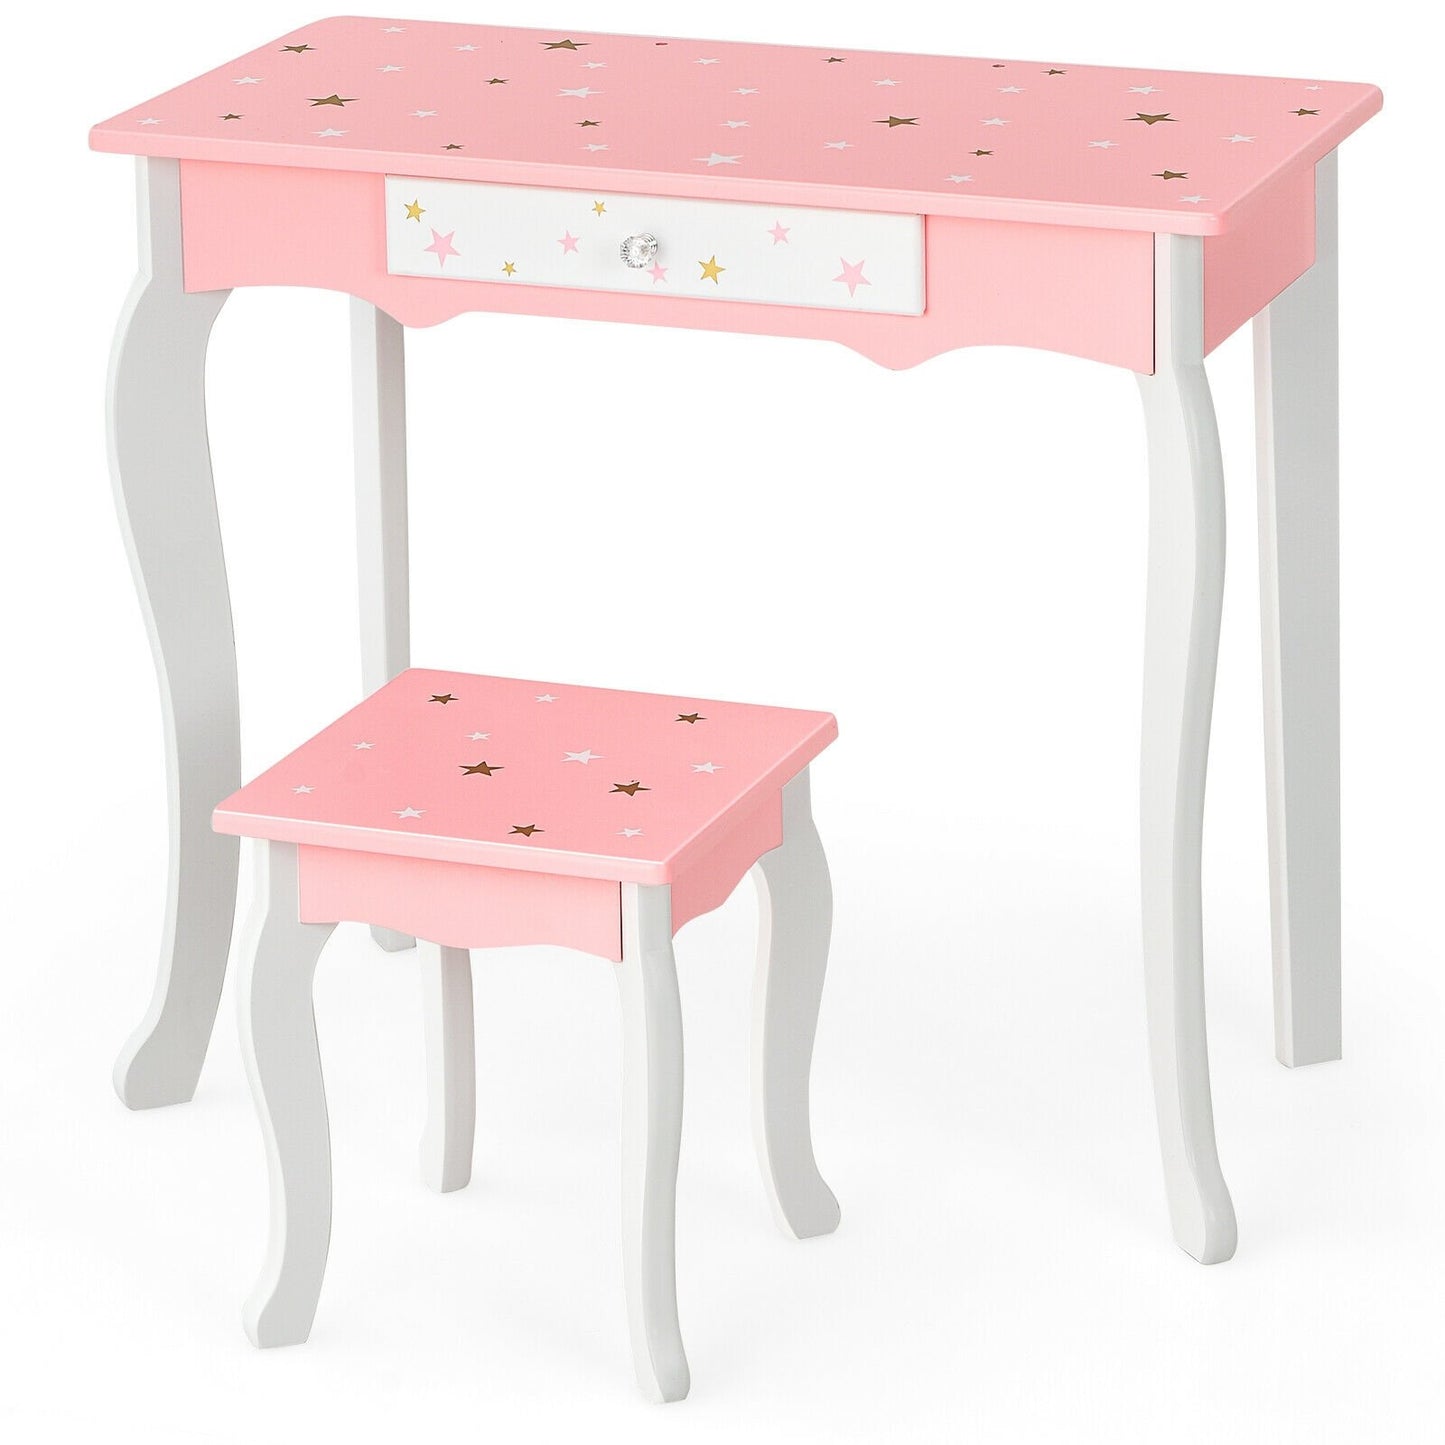 Kids Princess Vanity Table and Stool Set with Tri-folding Mirror and Drawer, Pink